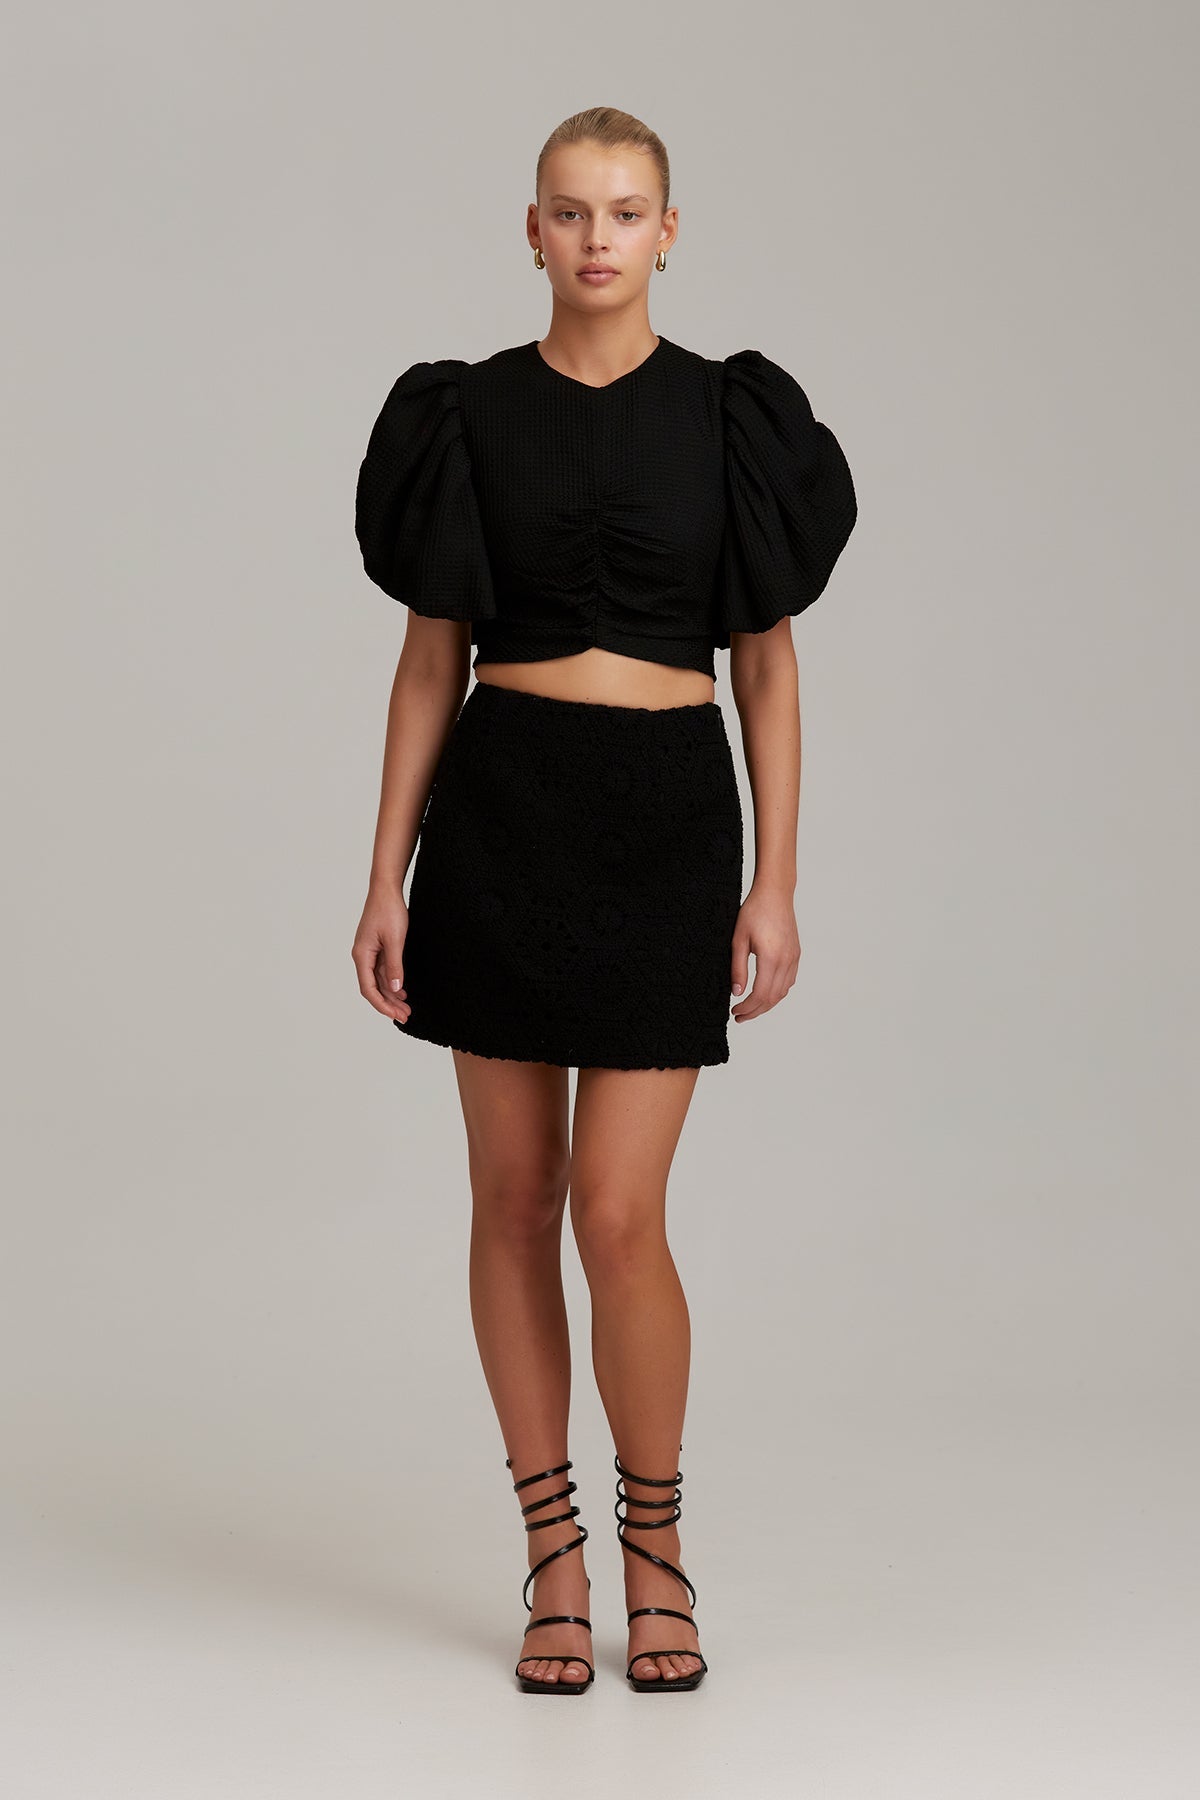 C/MEO Collective - Nuance Skirt - Black